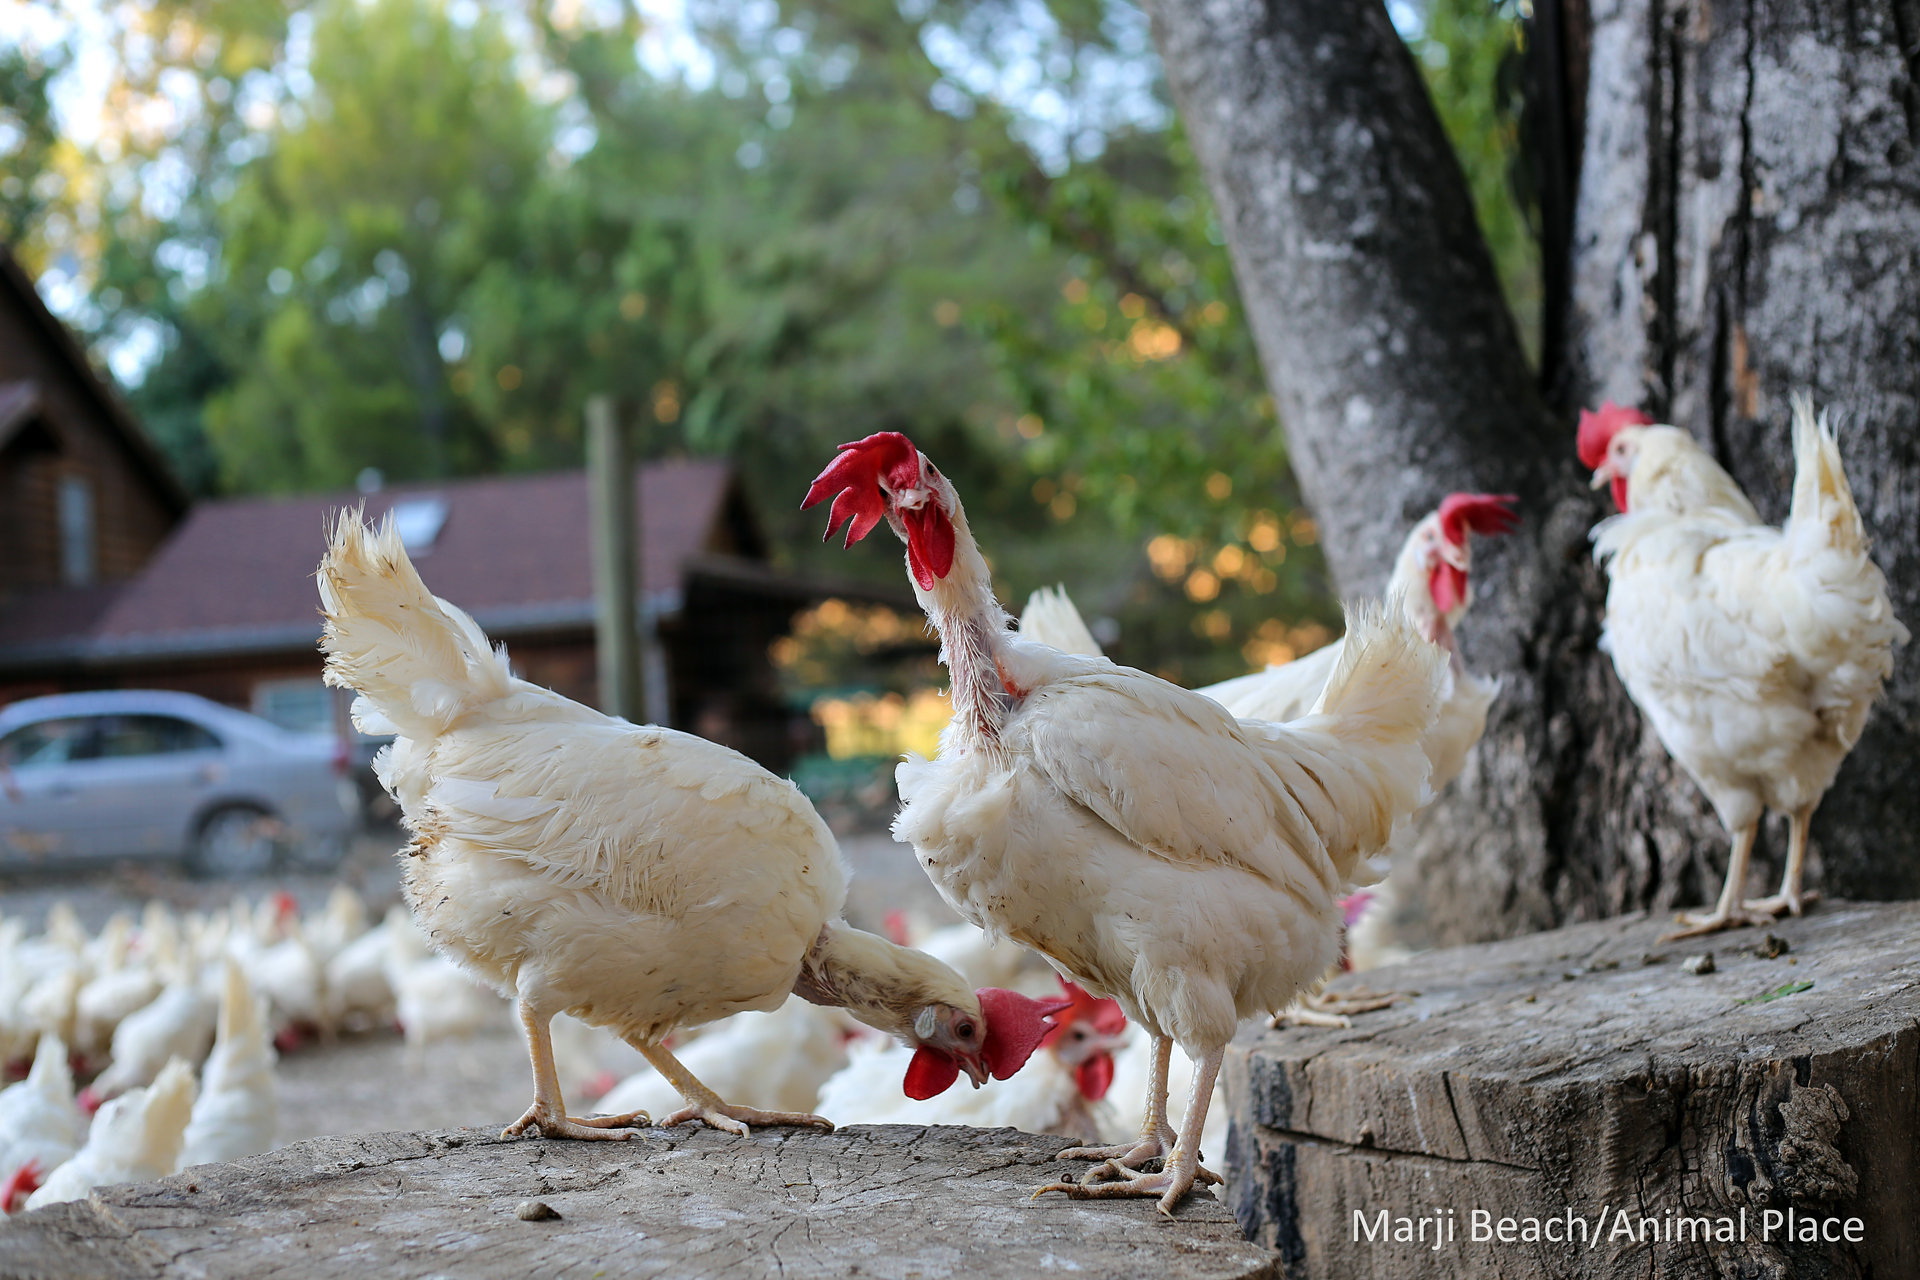 Animal Place provides a sanctuary for chickens like these (or roosters) when they have nowhere else to go and farms don't want them.